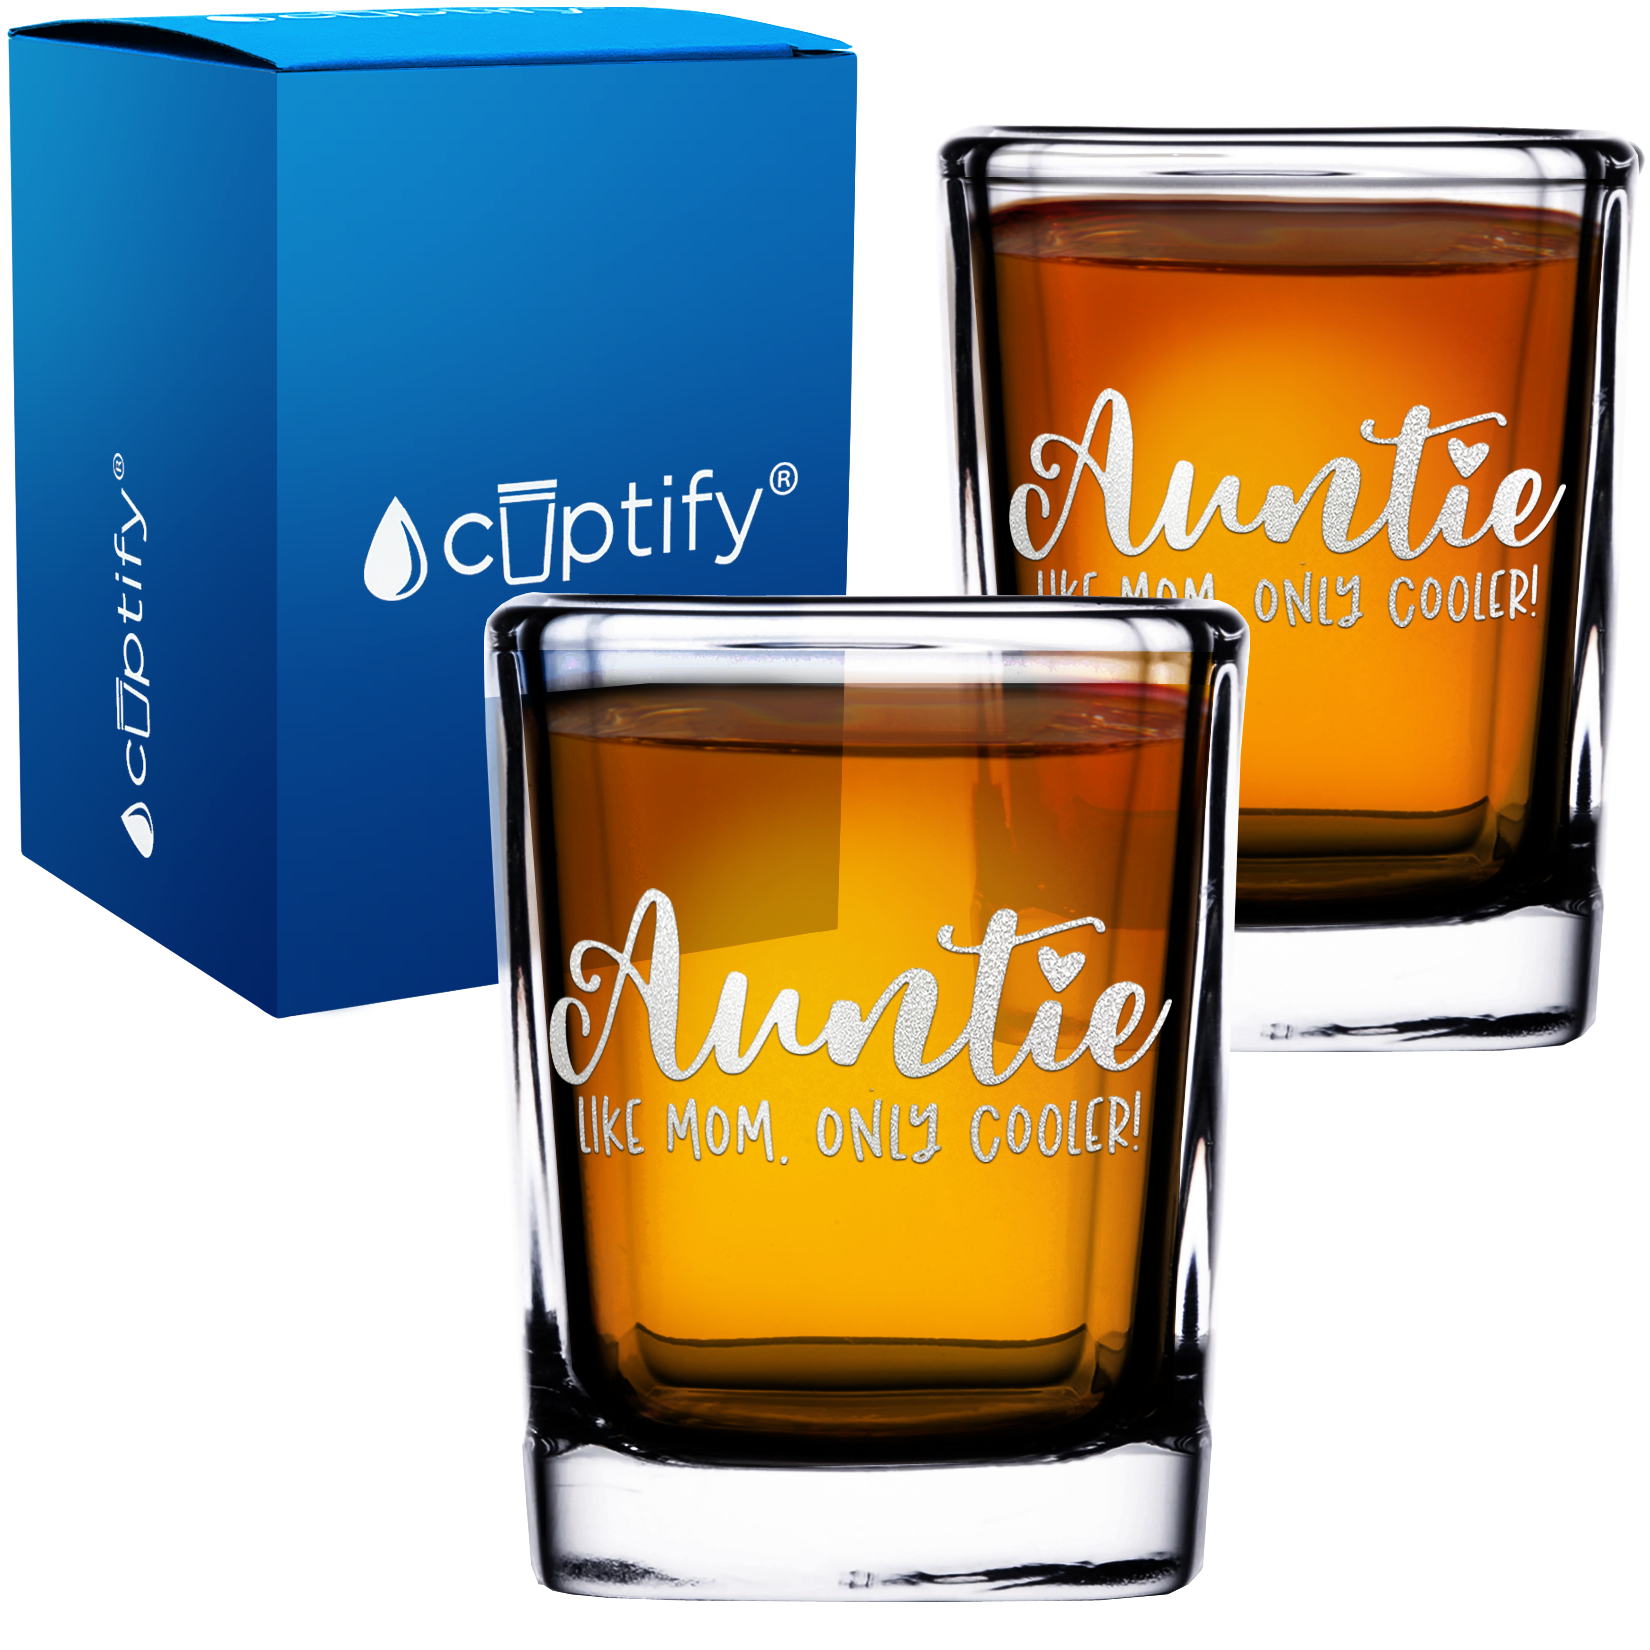 Auntie Like Mom, Only Cooler! 2oz Square Shot Glasses - Set of 2